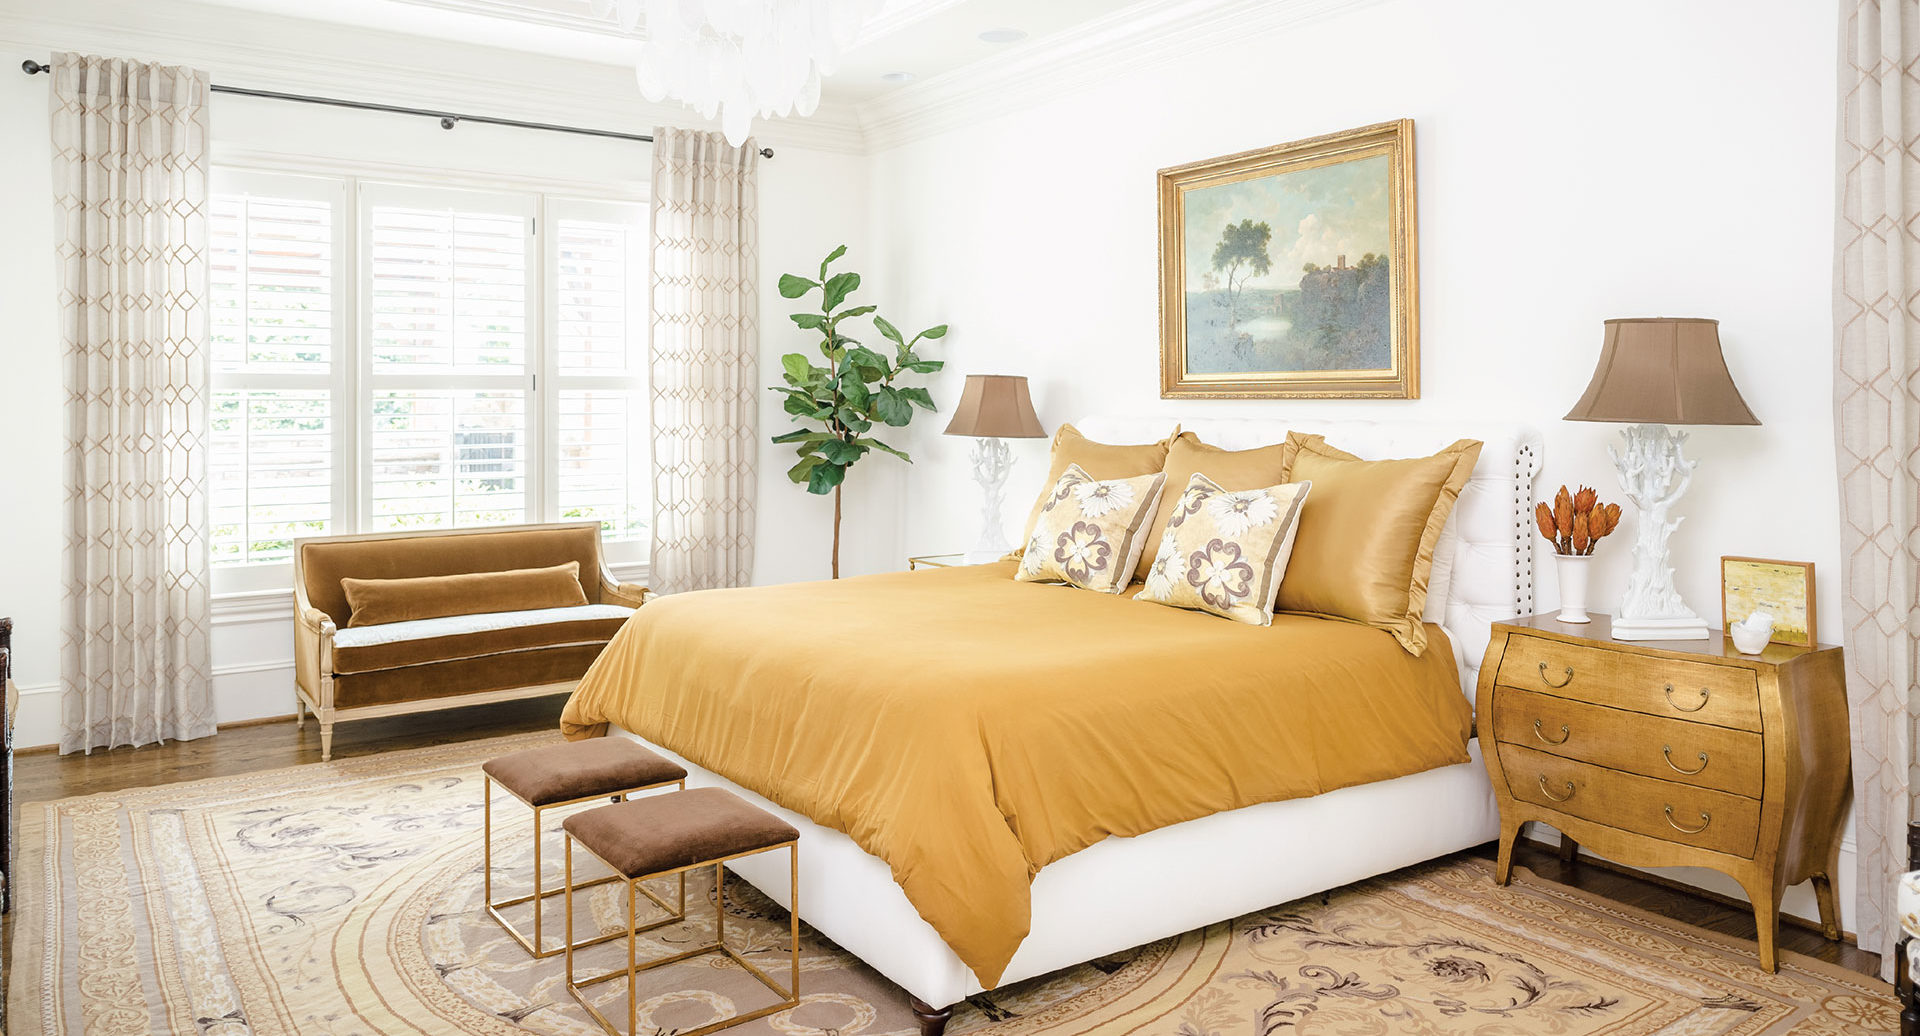 Try one of these bold and trendy color schemes in the bedroom